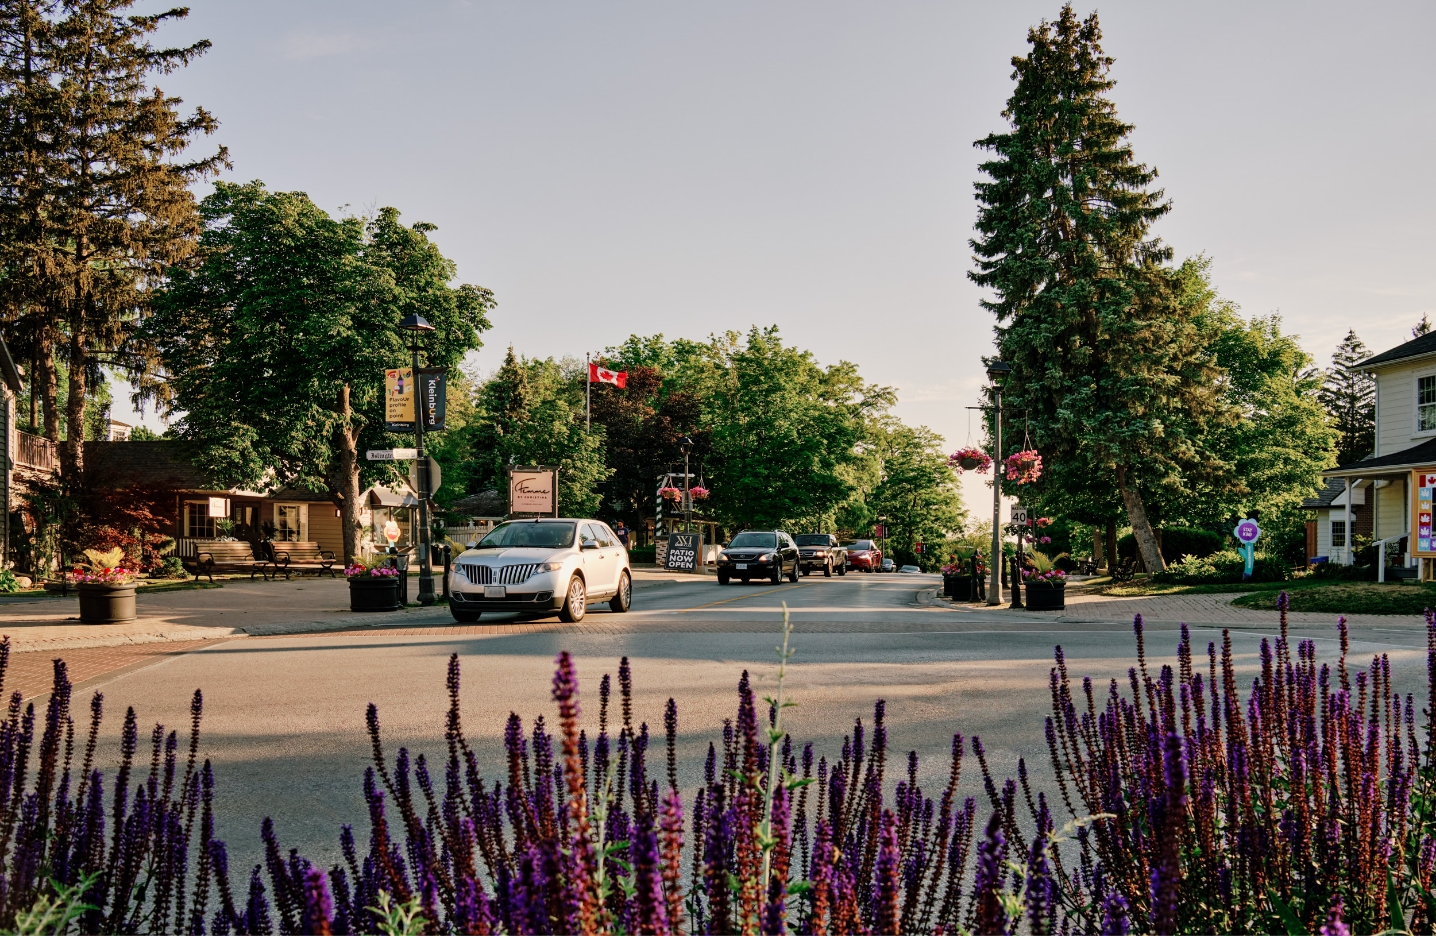 A main street showing a driving car, with flowers and trees along the road.